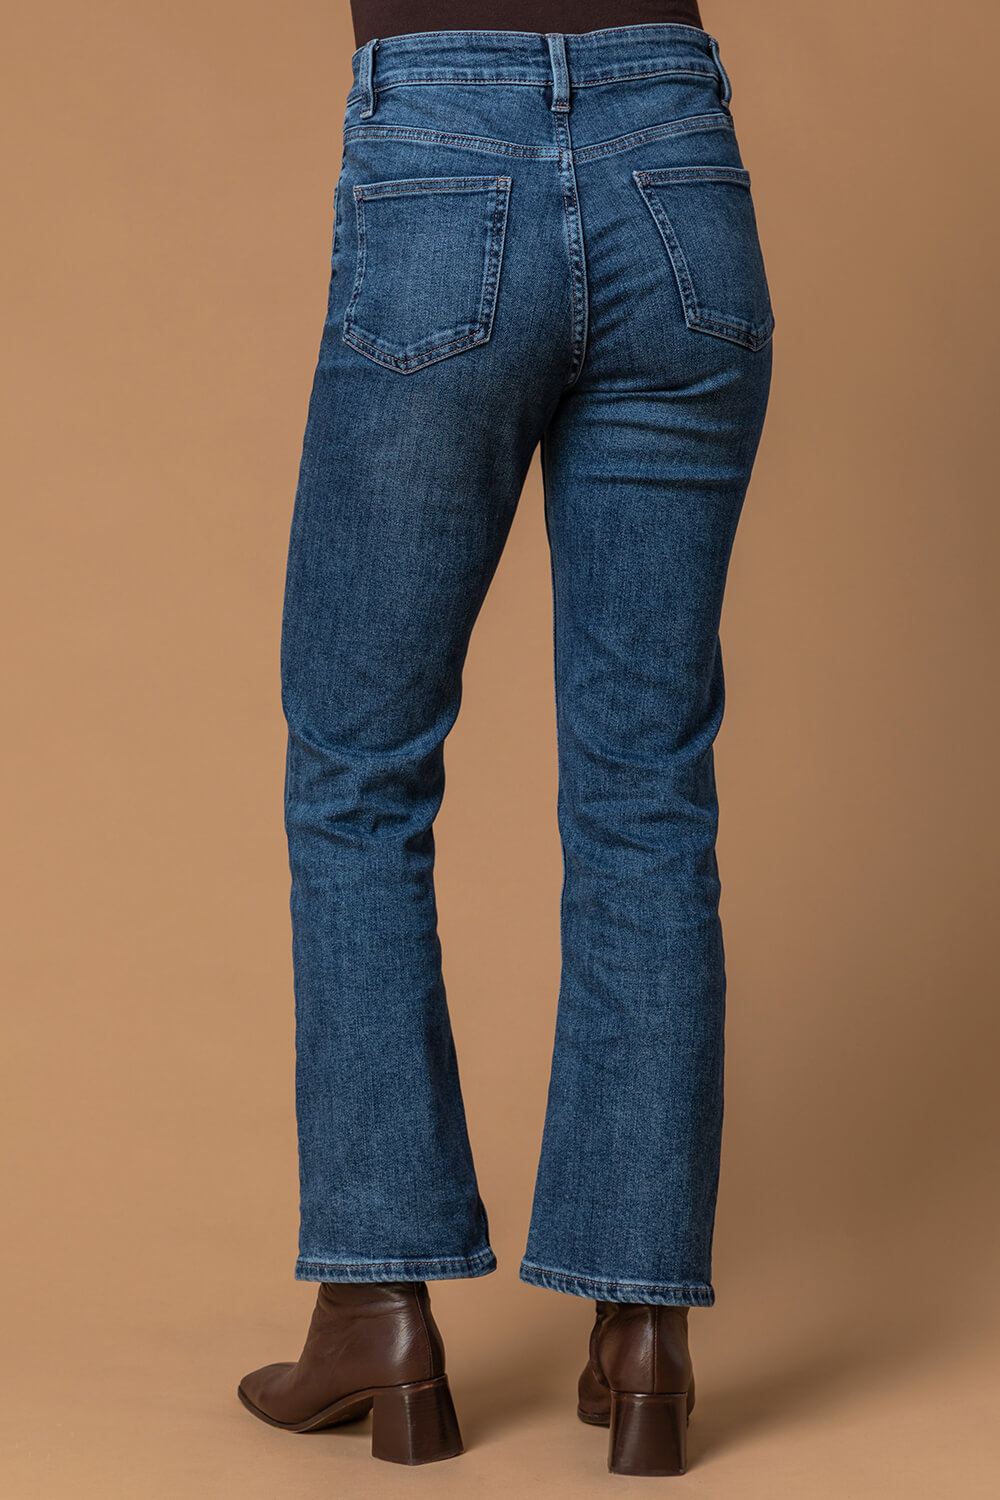 Denim 29" Essential Stretch Bootcut Jeans, Image 2 of 4